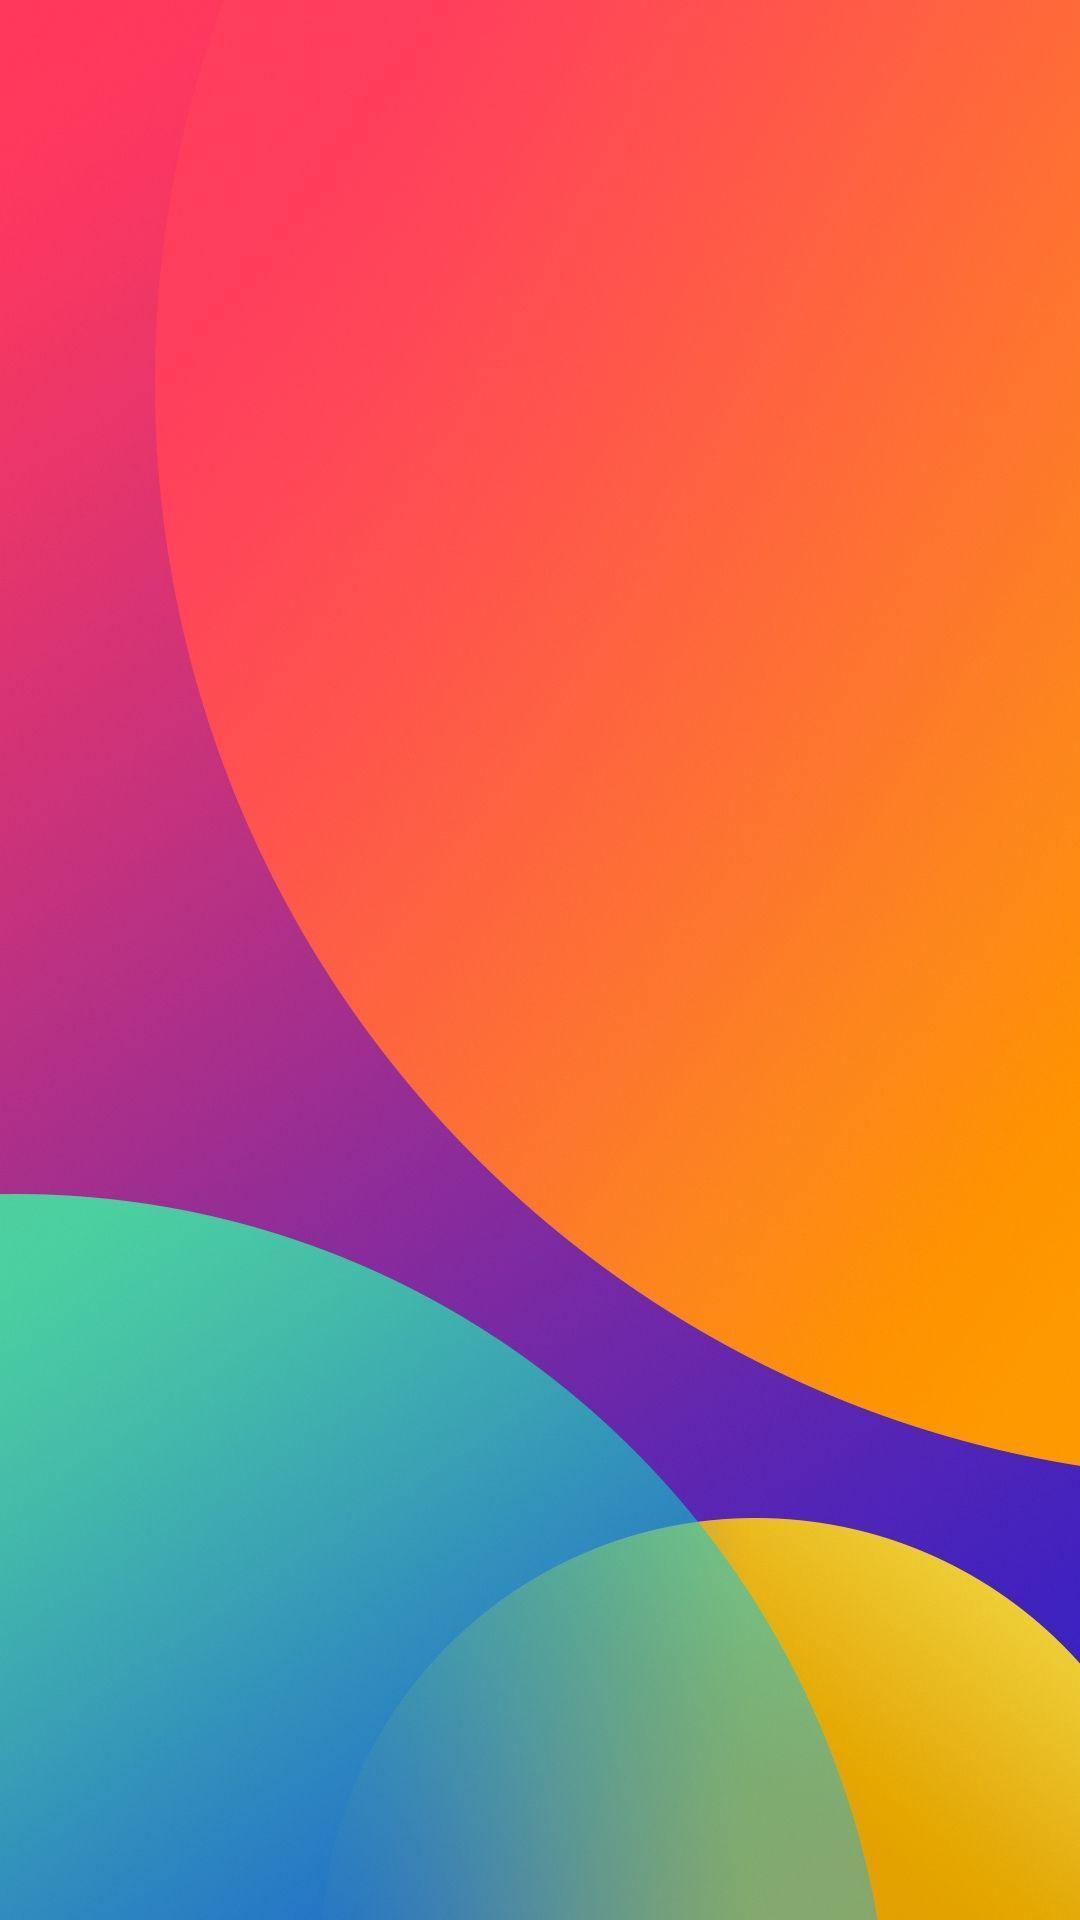 Meizu MX5 wallpaper available for download